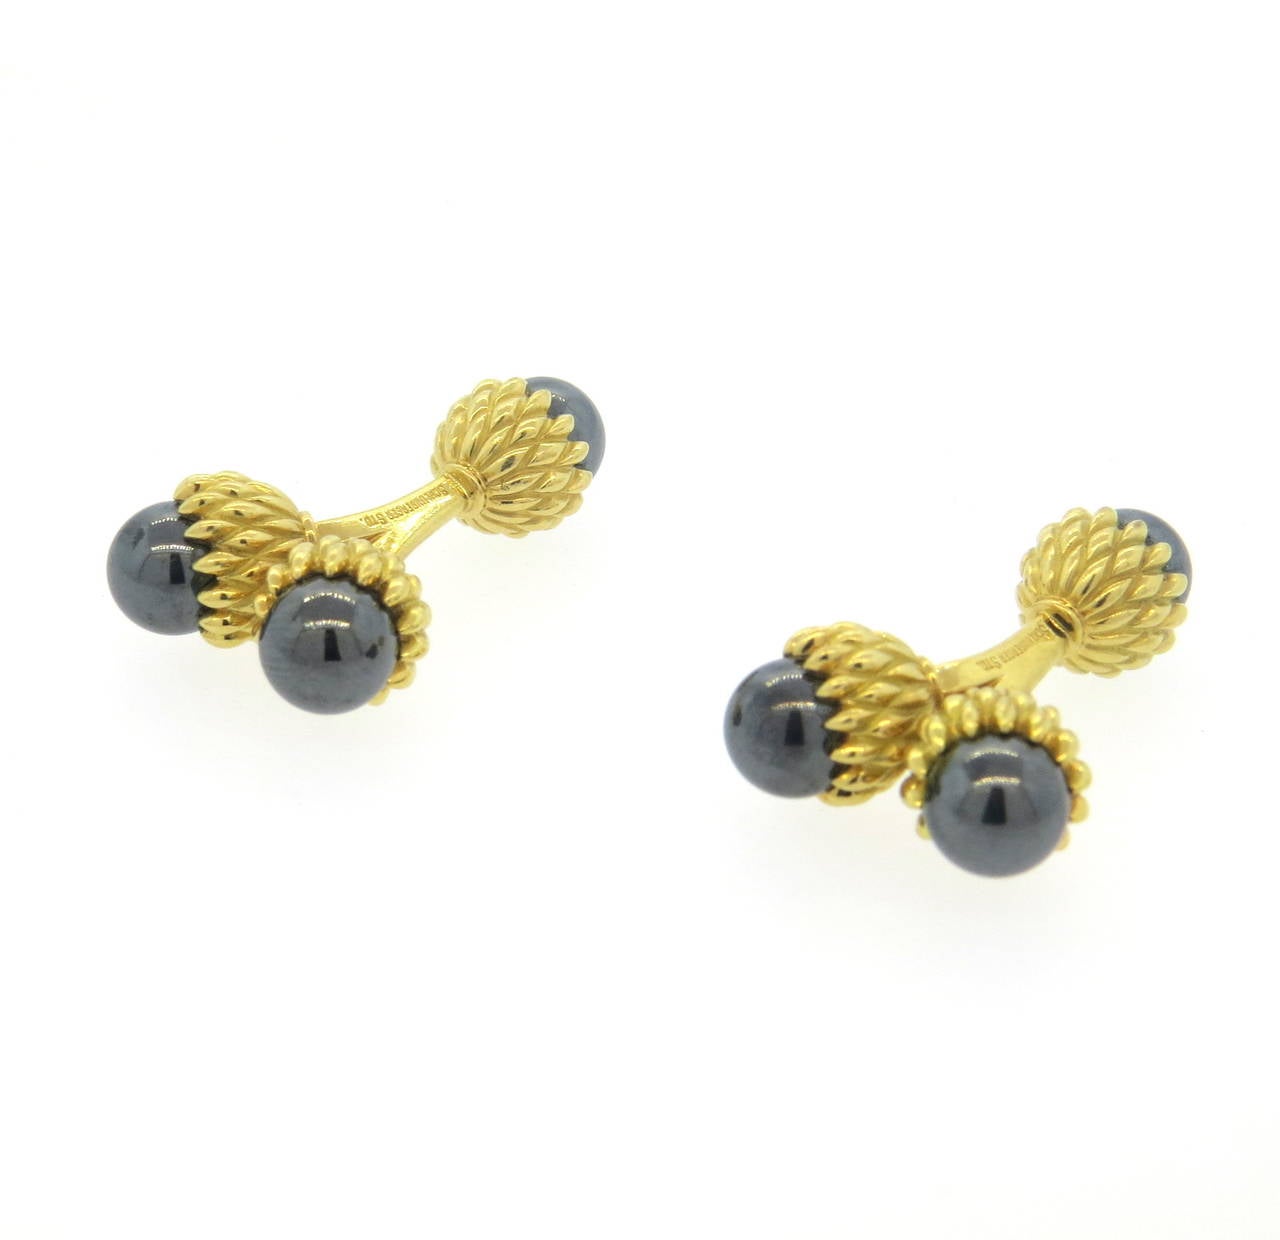 A pair of 18k yellow gold acorn motif cufflinks, set with hematite (7.5mm).  Crafted by Jean Schlumberger for Tiffany & Co., the cufflinks measure 20mm x 10mm in the front and 10mm in diameter in back.  The weight of the cufflinks is 26.1 grams.